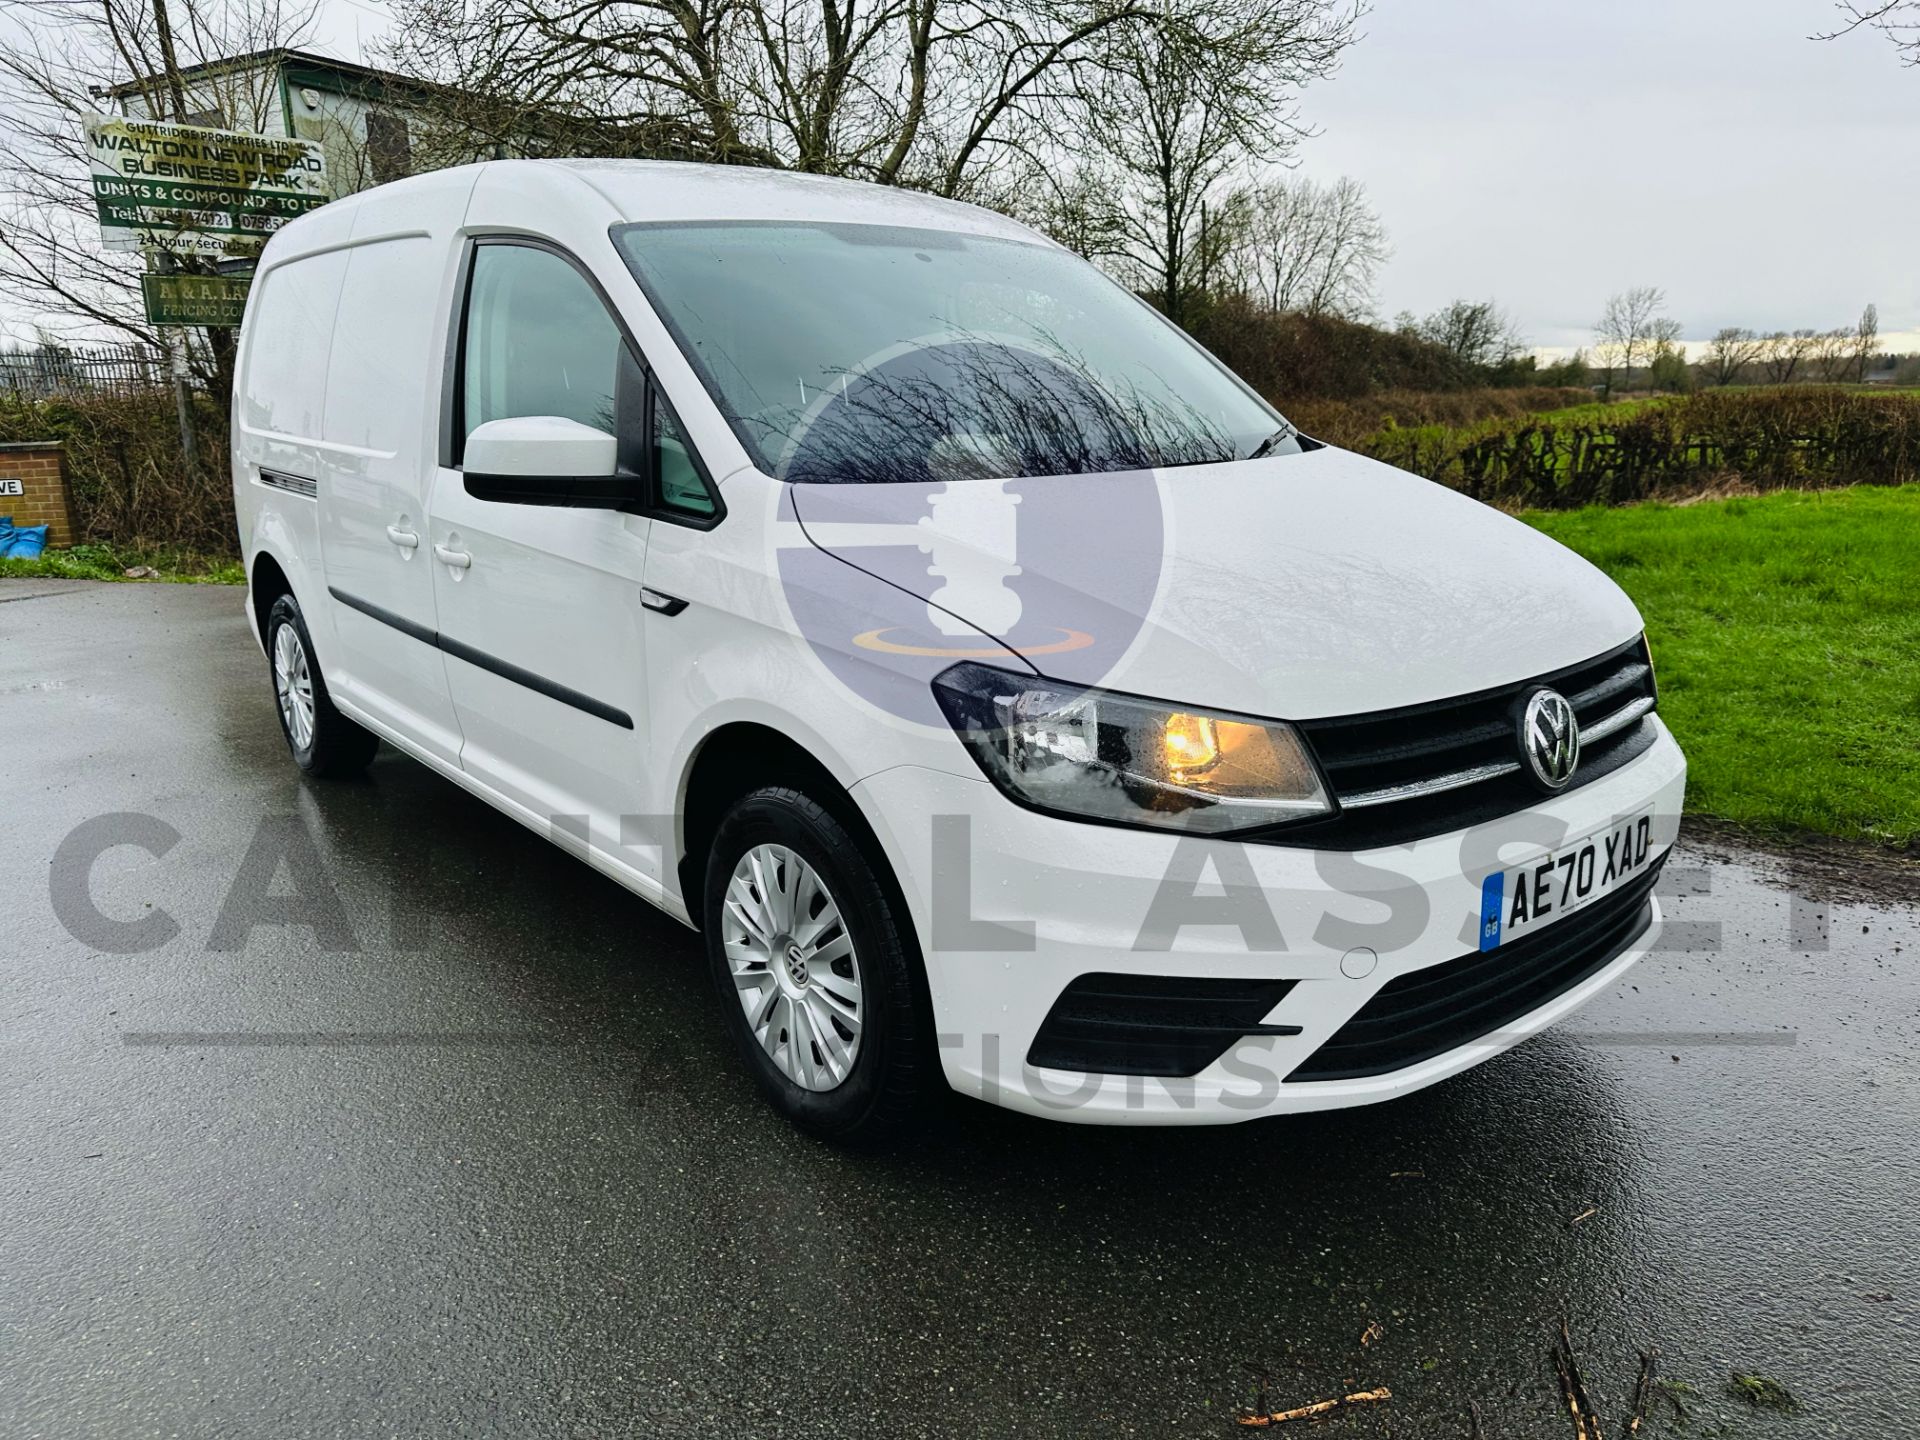 (ON SALE) VOLKSWAGEN CADDY 2.0TDI BMT TREND-LINE (2021 MODEL) MAXI / LWB-1 OWNER (AIR CON) EURO 6 - Image 2 of 29